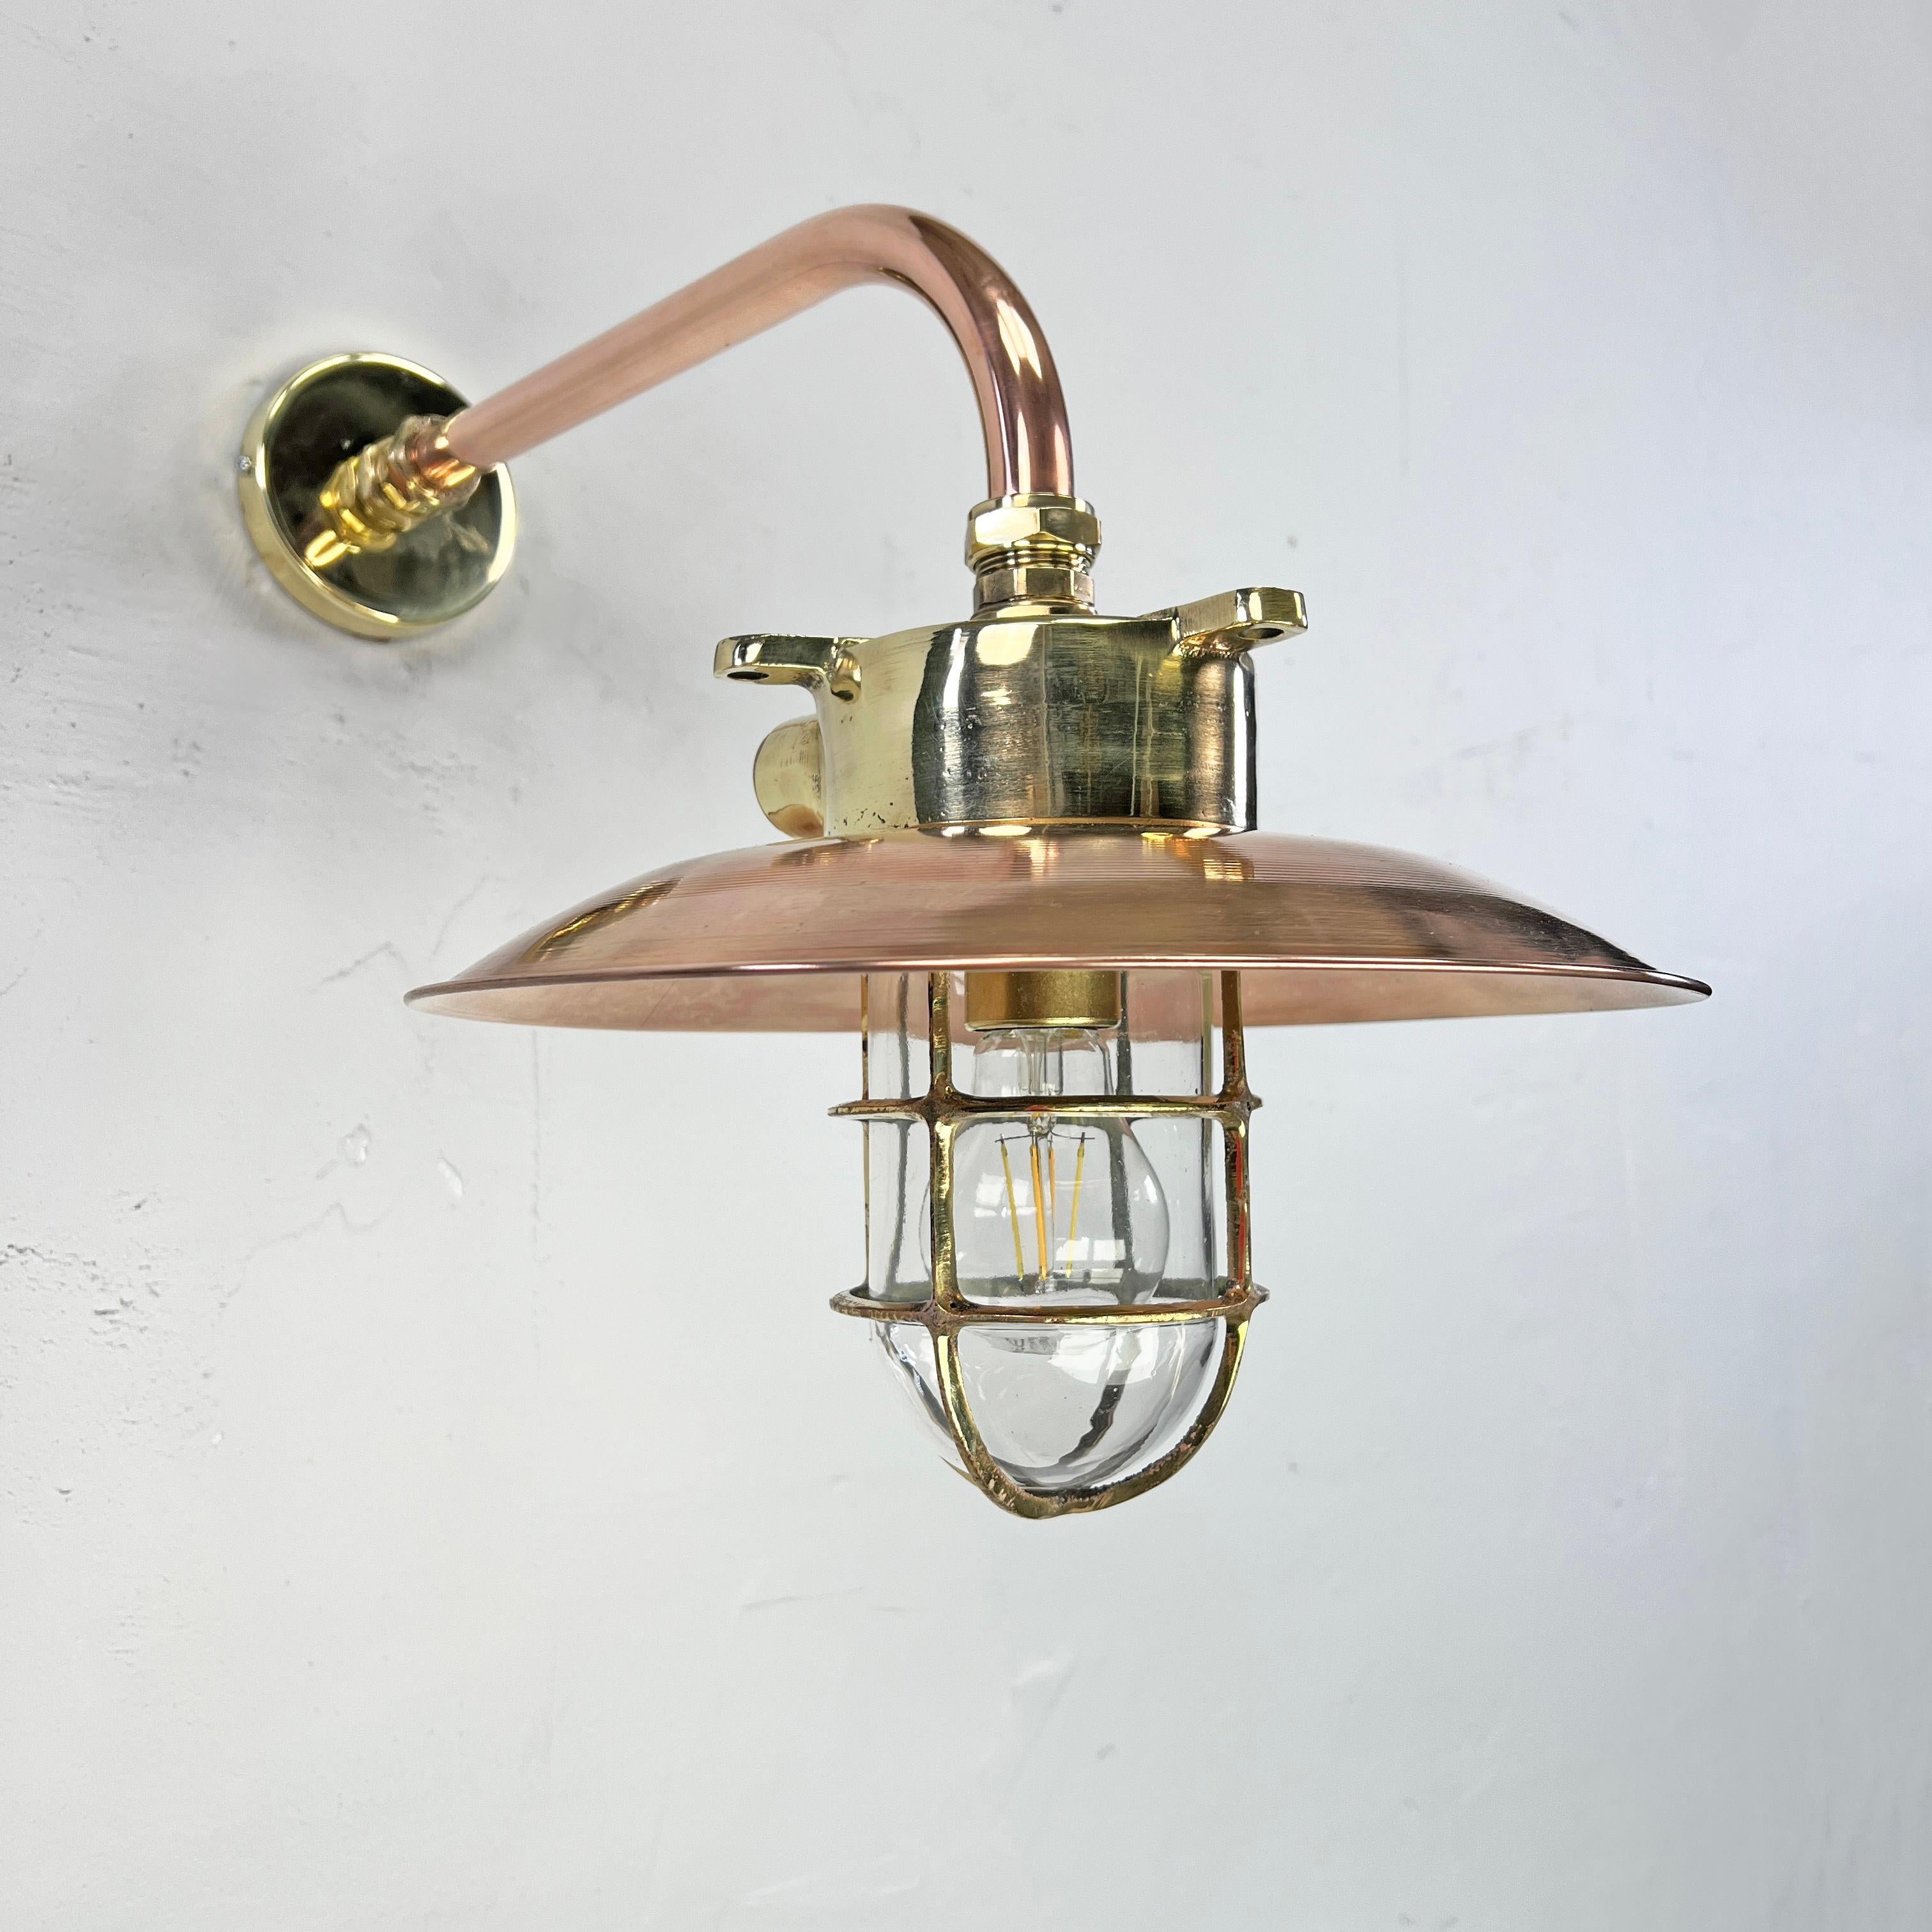 An industrial brass explosion proof wall light fixture with a bespoke brass and copper cantilever arm.

The lamp was originally made in Japan which was reclaimed from decommissioned cargo ships made during the 1970s. 

This fixture has been